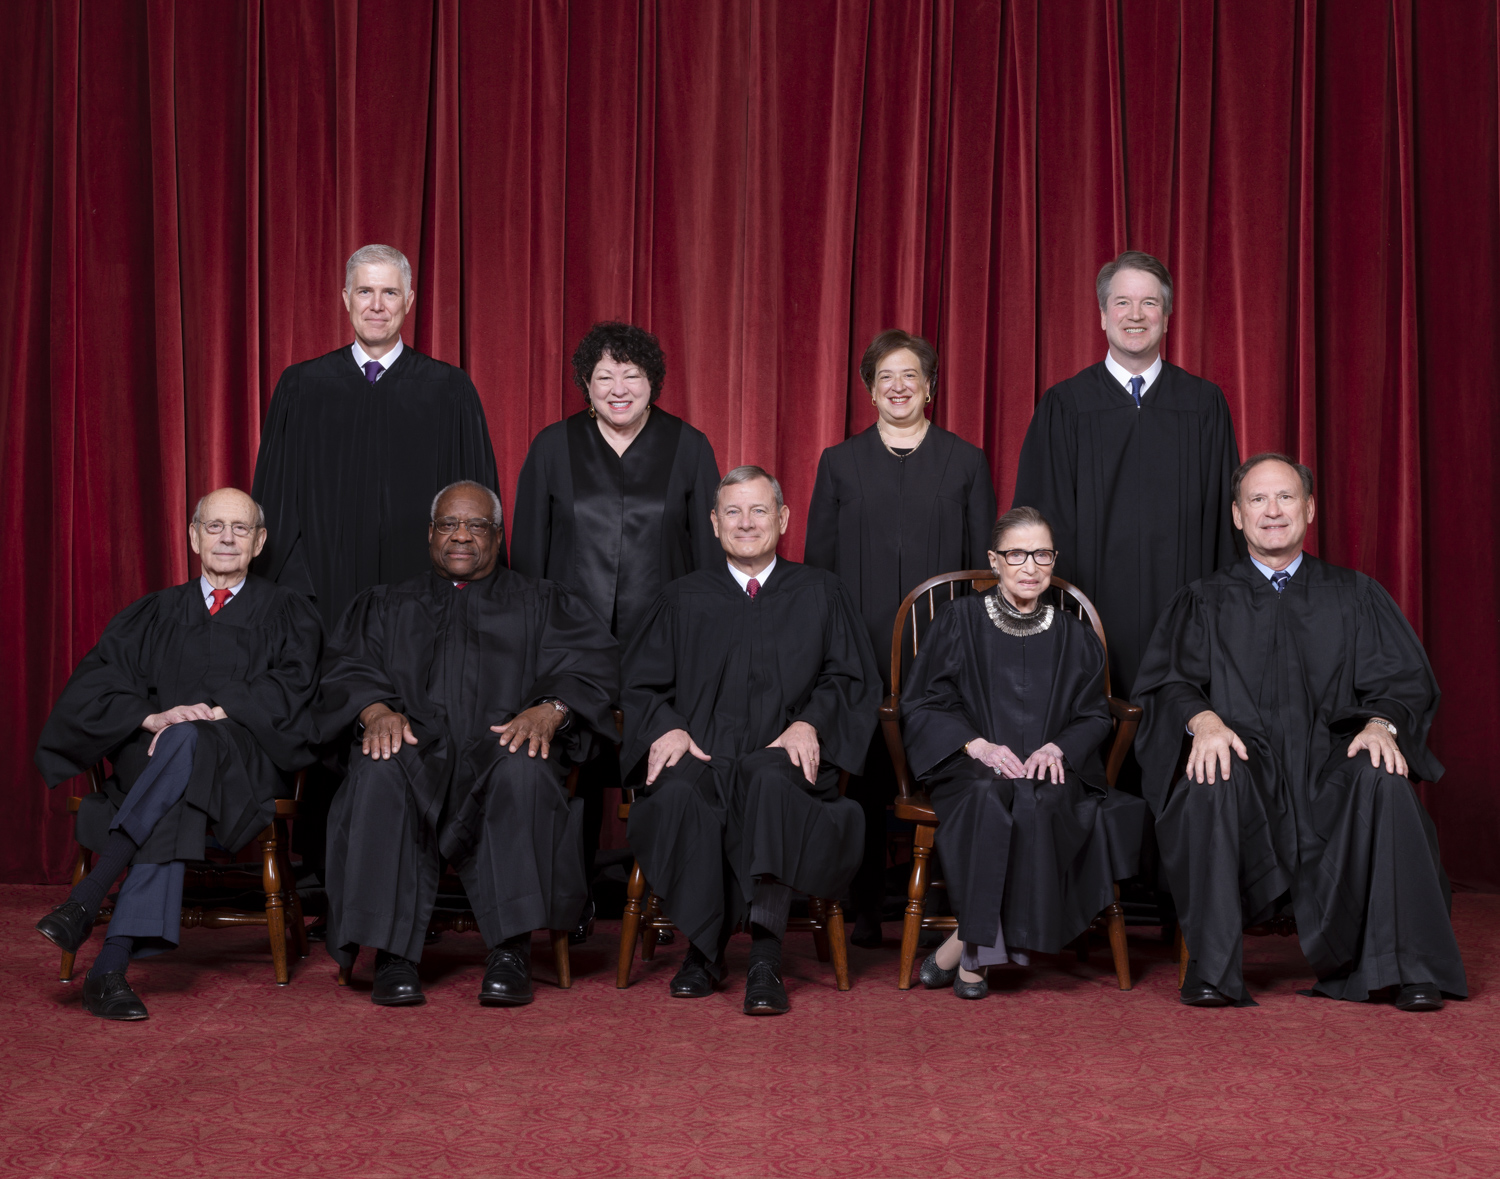 Black robes or bathrobes? Virus alters how the Supreme Court functions